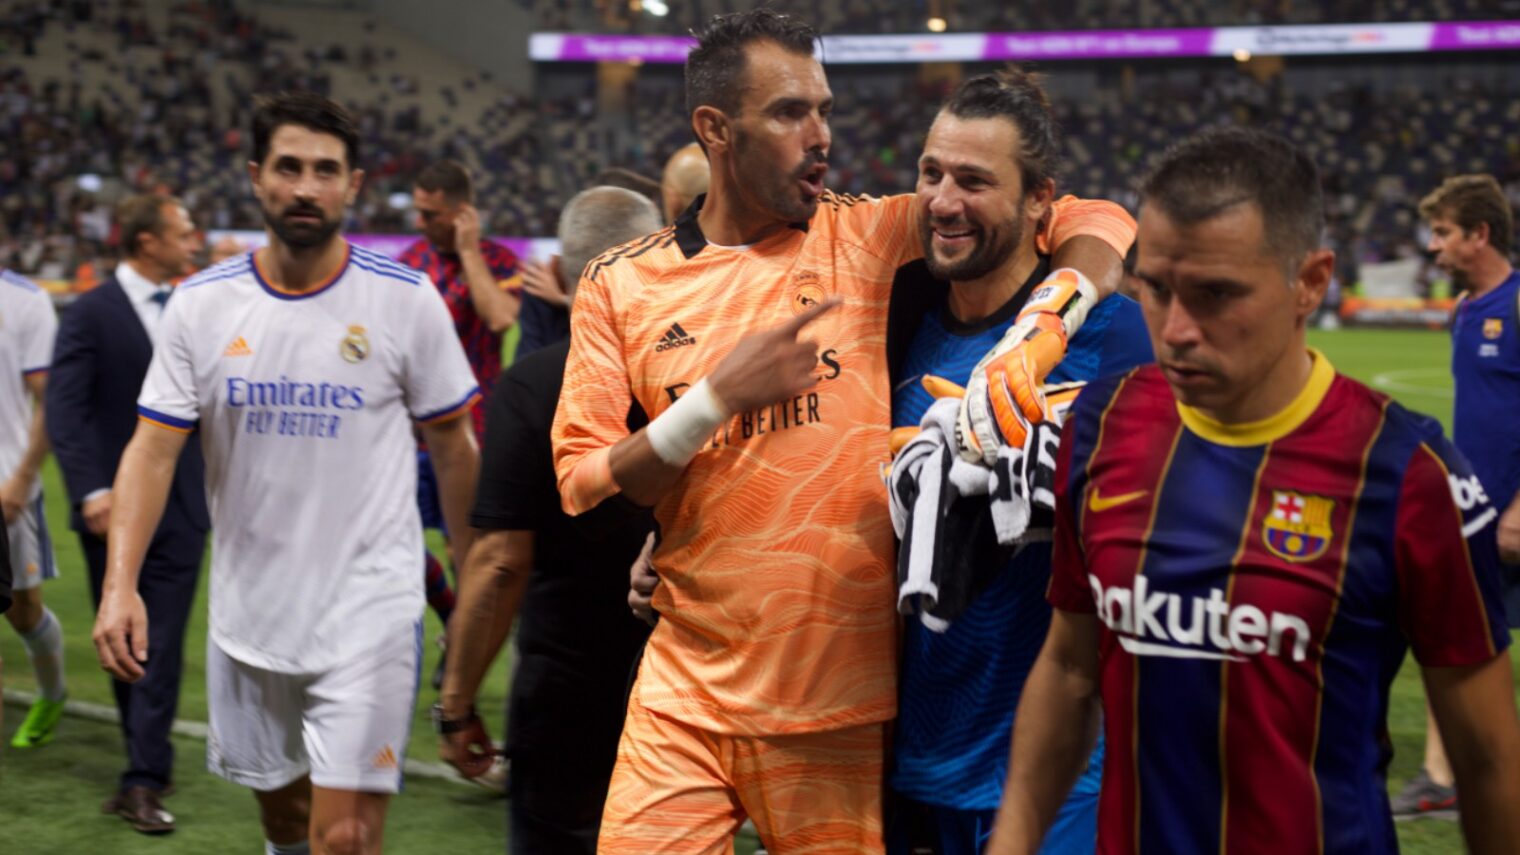 The goalkeepers of Real Madrid Leyendas and Barça Legends greet each other at the end of the first half of the match. Ahead of them, the Argentine Javier Saviola. Photo by José Apoj